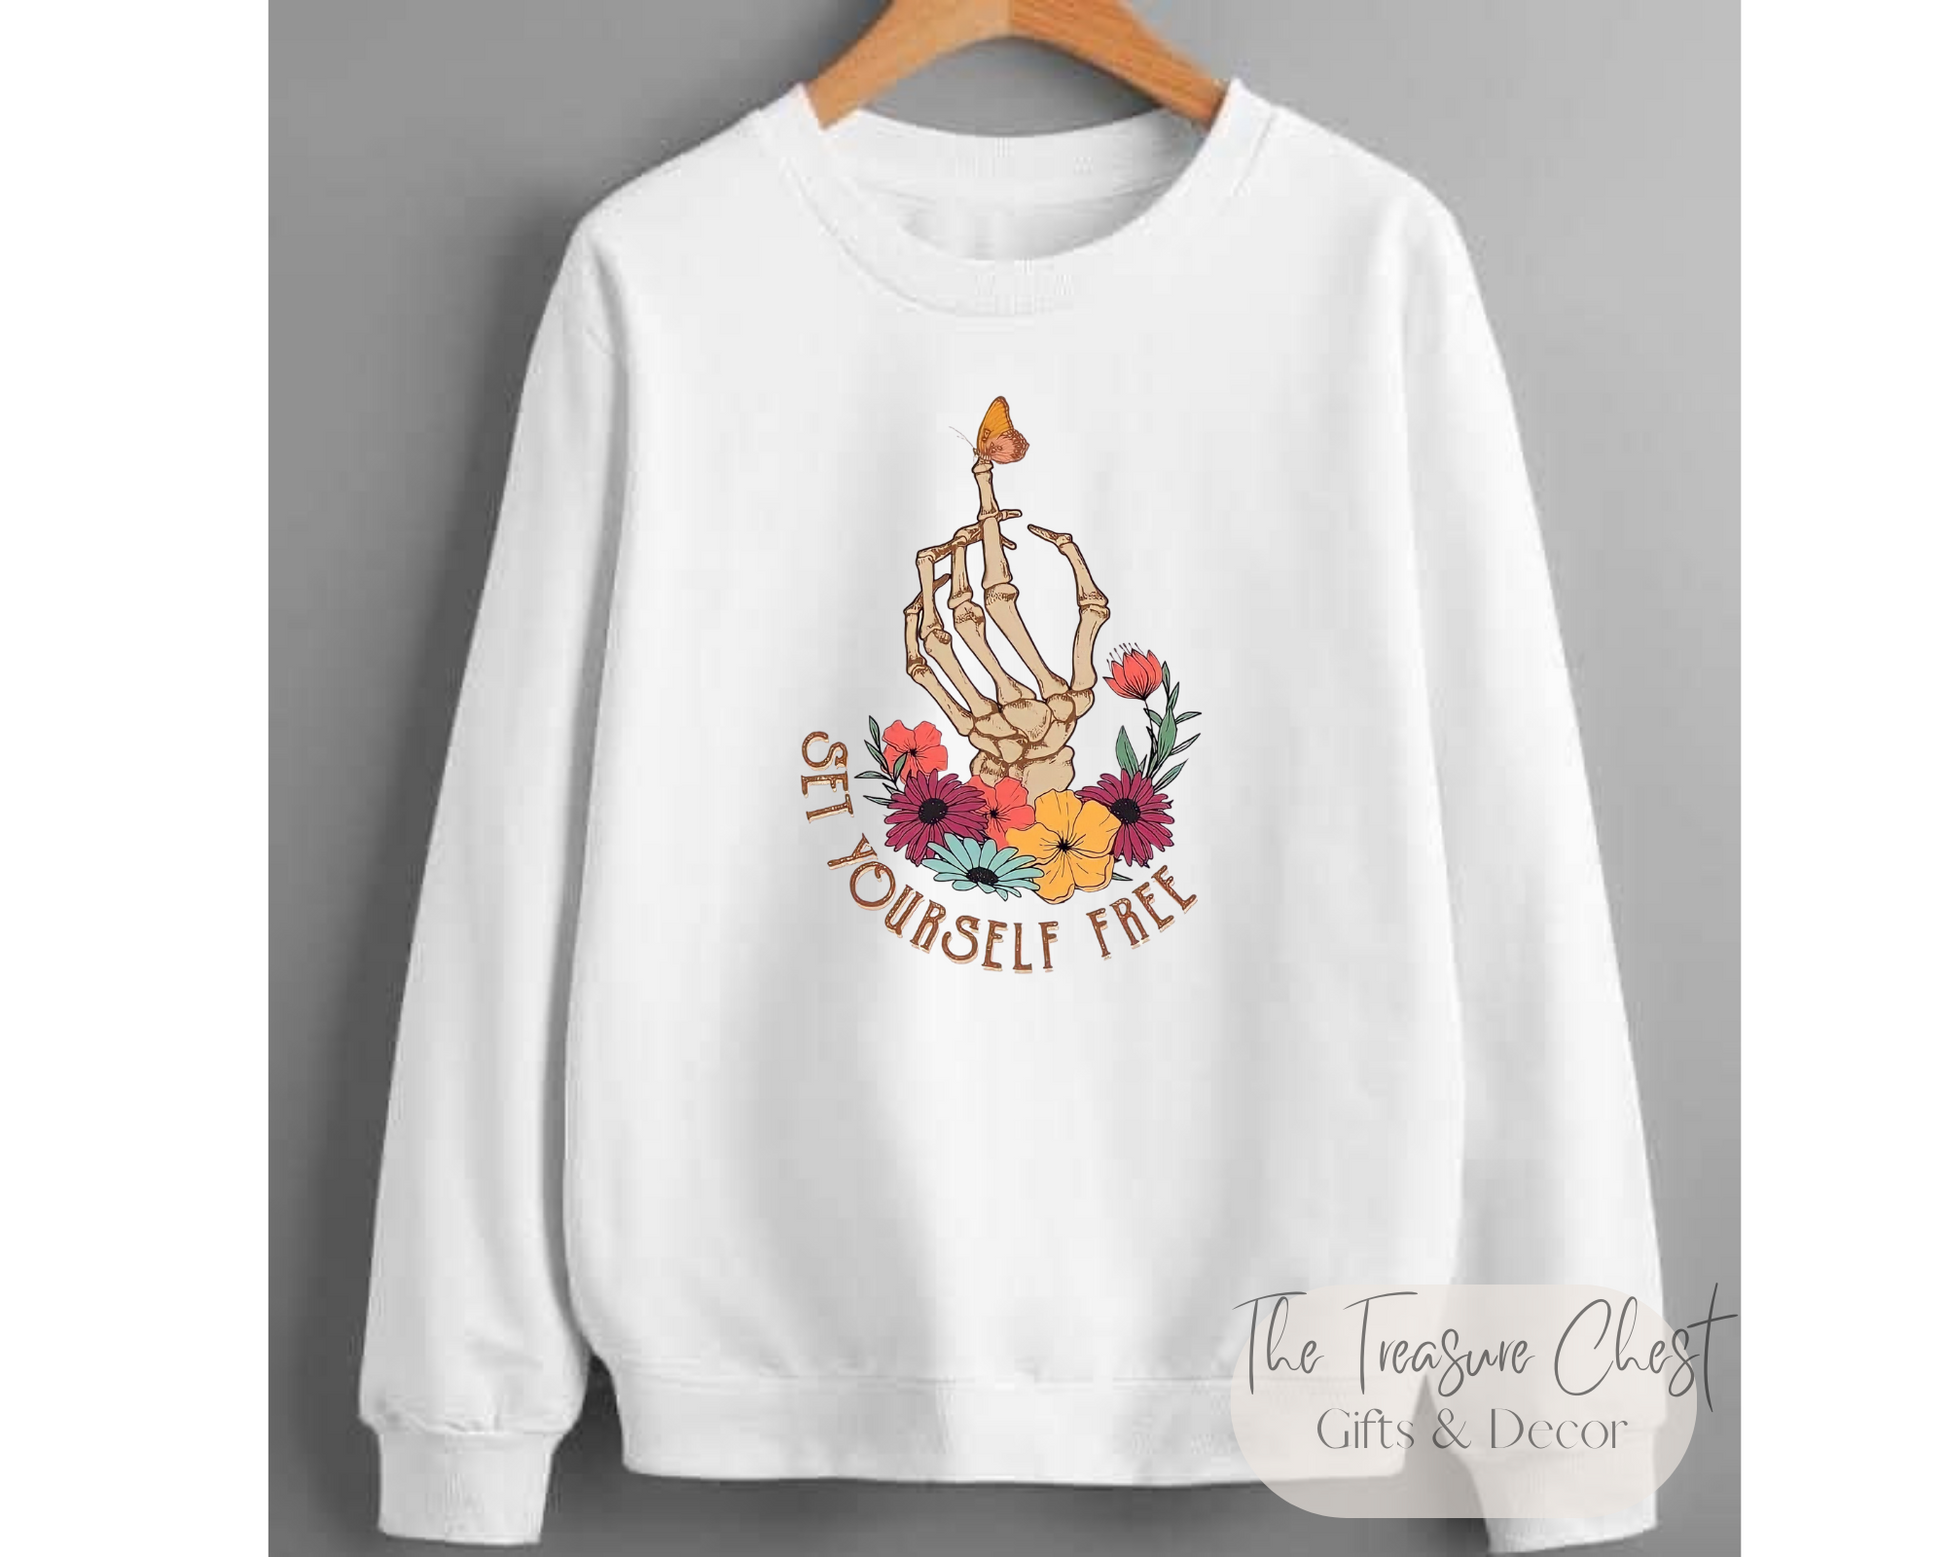 Our Set Yourself Free Graphic Crewneck Sweater features a skeleton hand with floral design on a crisp white sweatshirt. We have something for every woman and girl in your life. Our shirts are perfect for casual wear, workouts and yoga, as well as lounge around in style. Stay warm and cozy in soft premium material.  Our sweatshirts are made of a heavy, yet soft and breathable material that maintains it's shape and size. Pair it with your favourite jeans or joggers for a casual look.